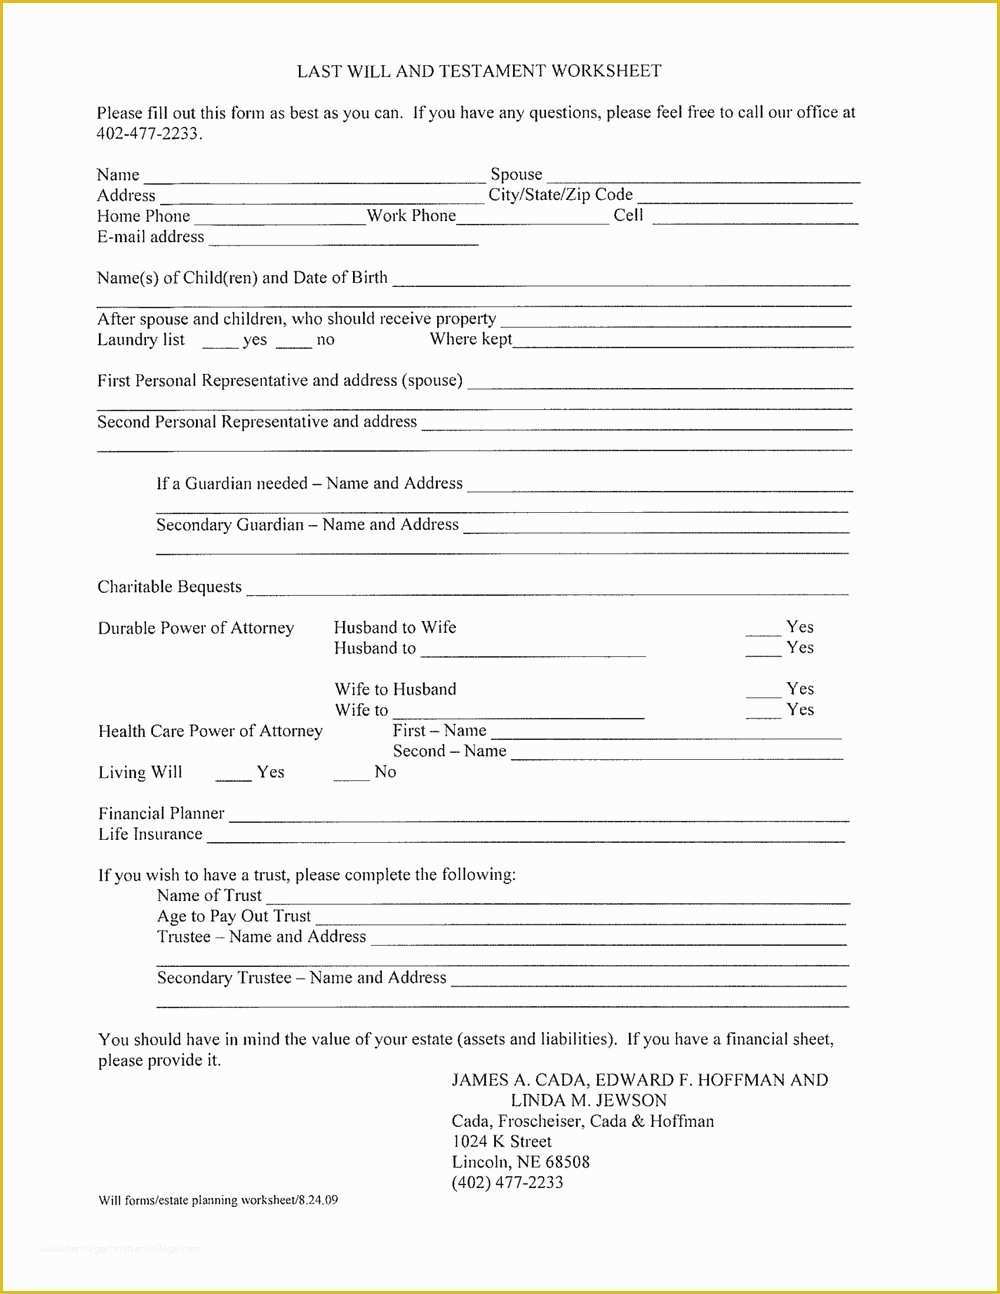 Free Living Will Template Illinois Of Free Printable Last Will and Testament forms Australia